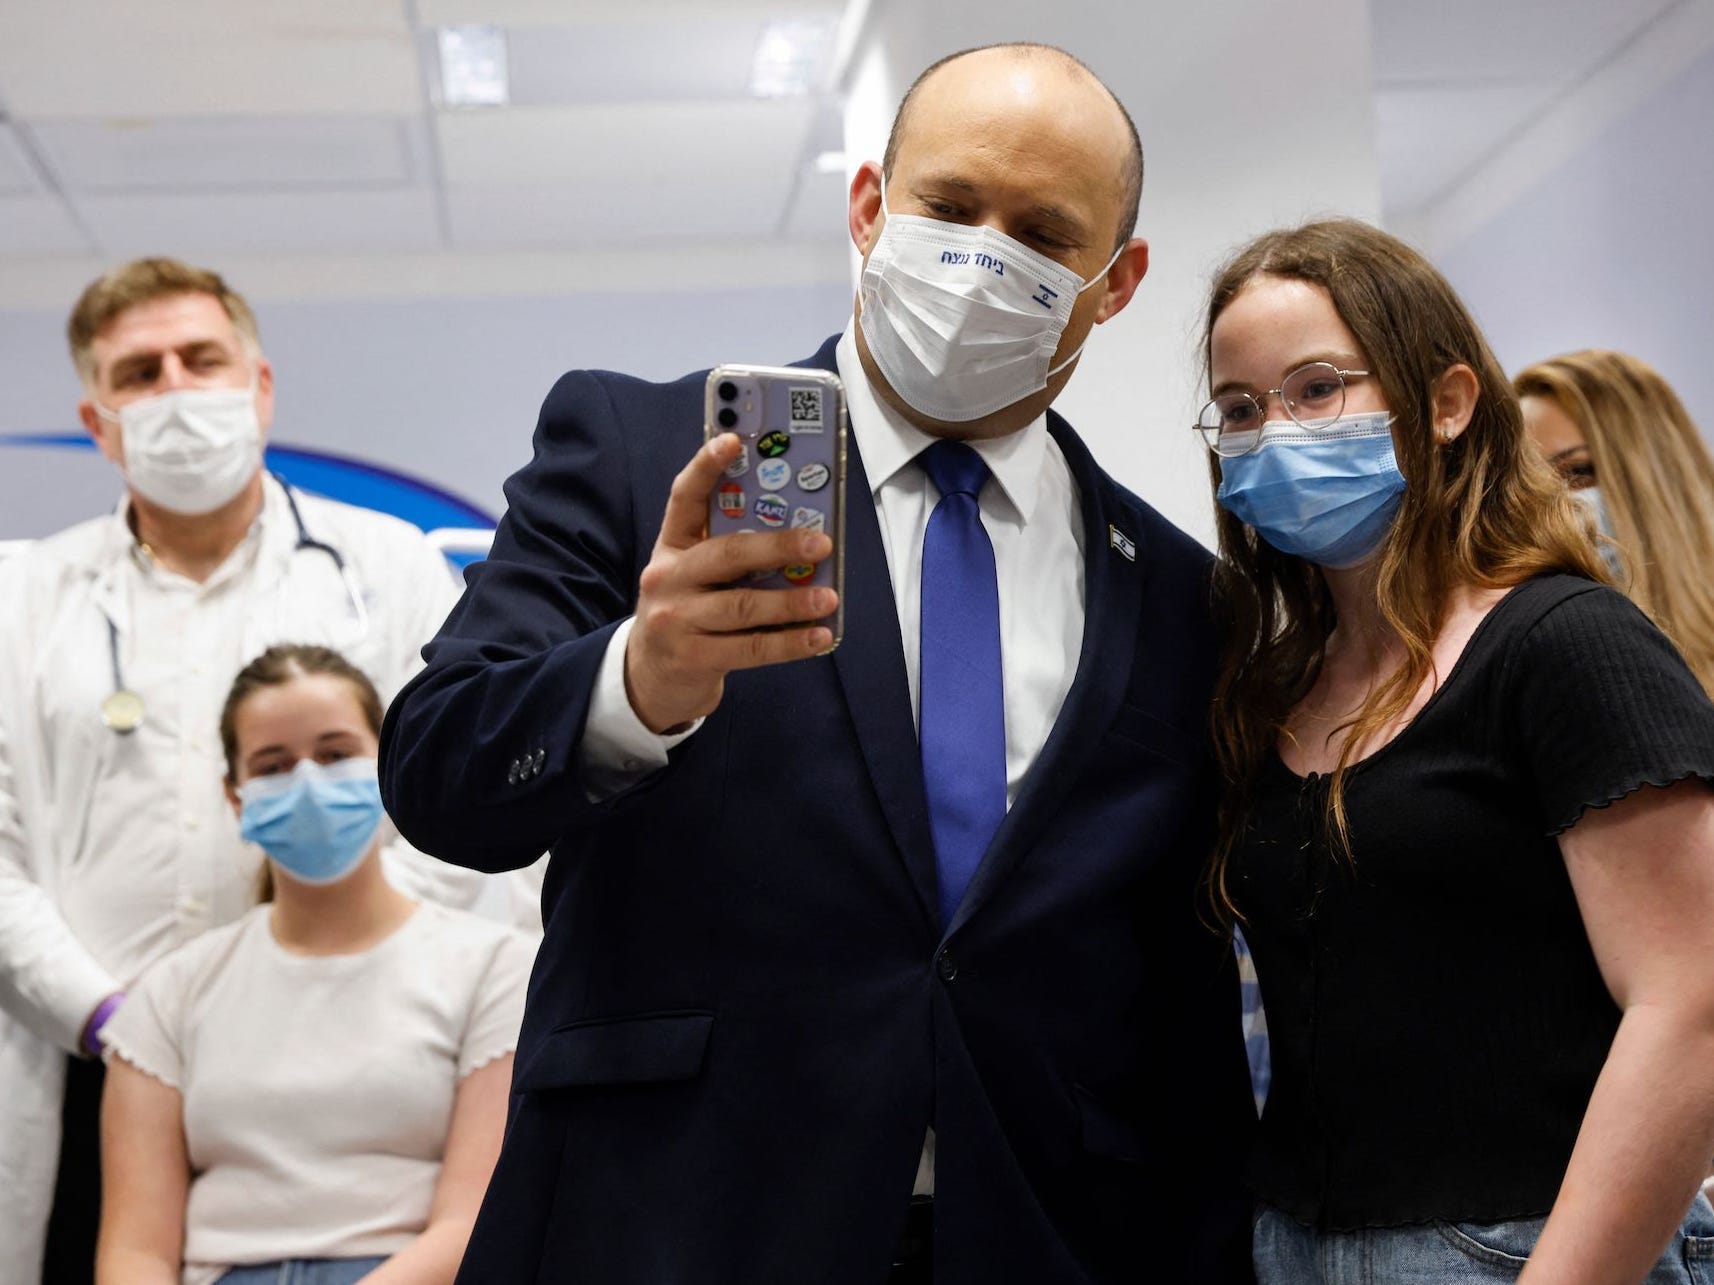 Israel's Prime minister Naftali Bennet is standing next to an adolescent, holding out a phone as he records a video message in a hospital ward. Behind him are two health workers and a child looking on